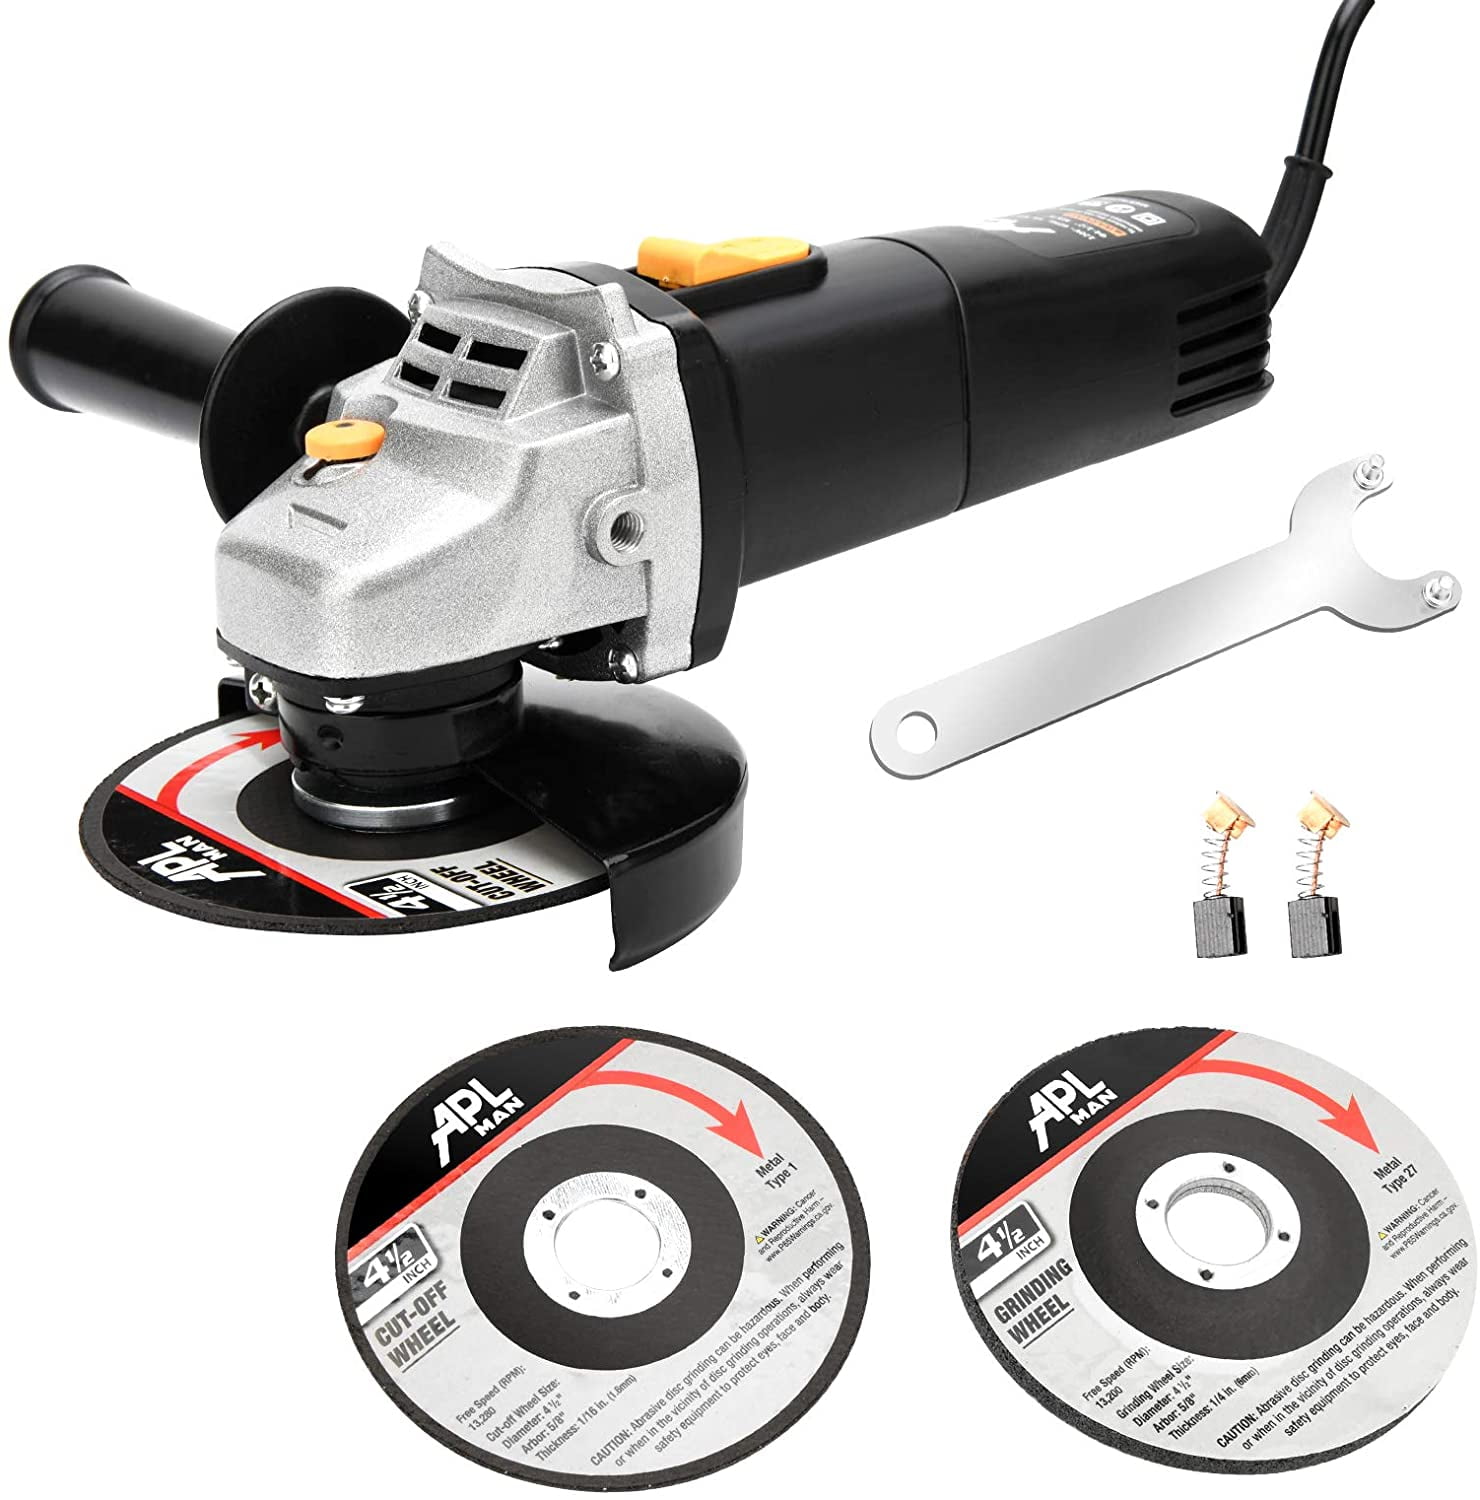 AVID POWER Angle Grinder, 7.5-Amp 4-1/2 inch Electric Grinder Power Tools  with Grinding and Cutting Wheels, Flap Disc and Auxiliary Handle for